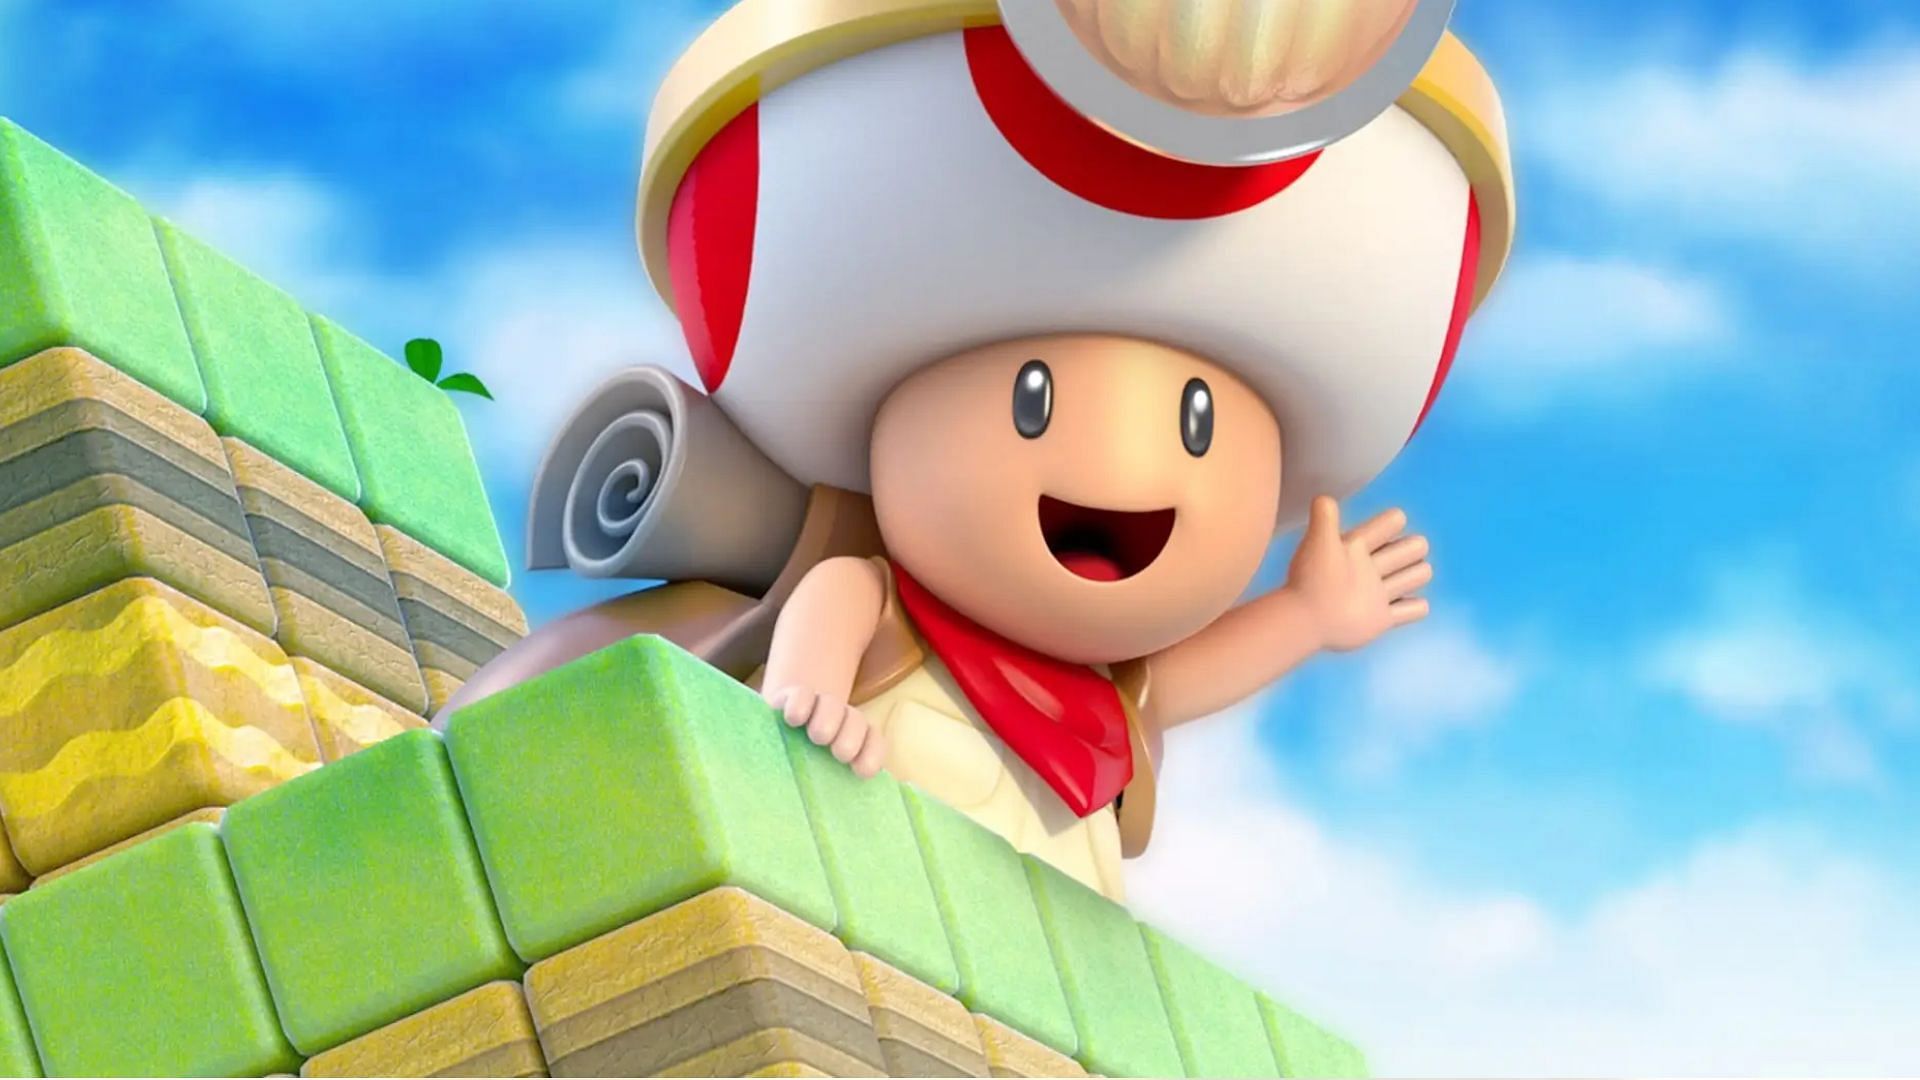 Toad is a charismatic friend of Mario (Image via Nintendo)